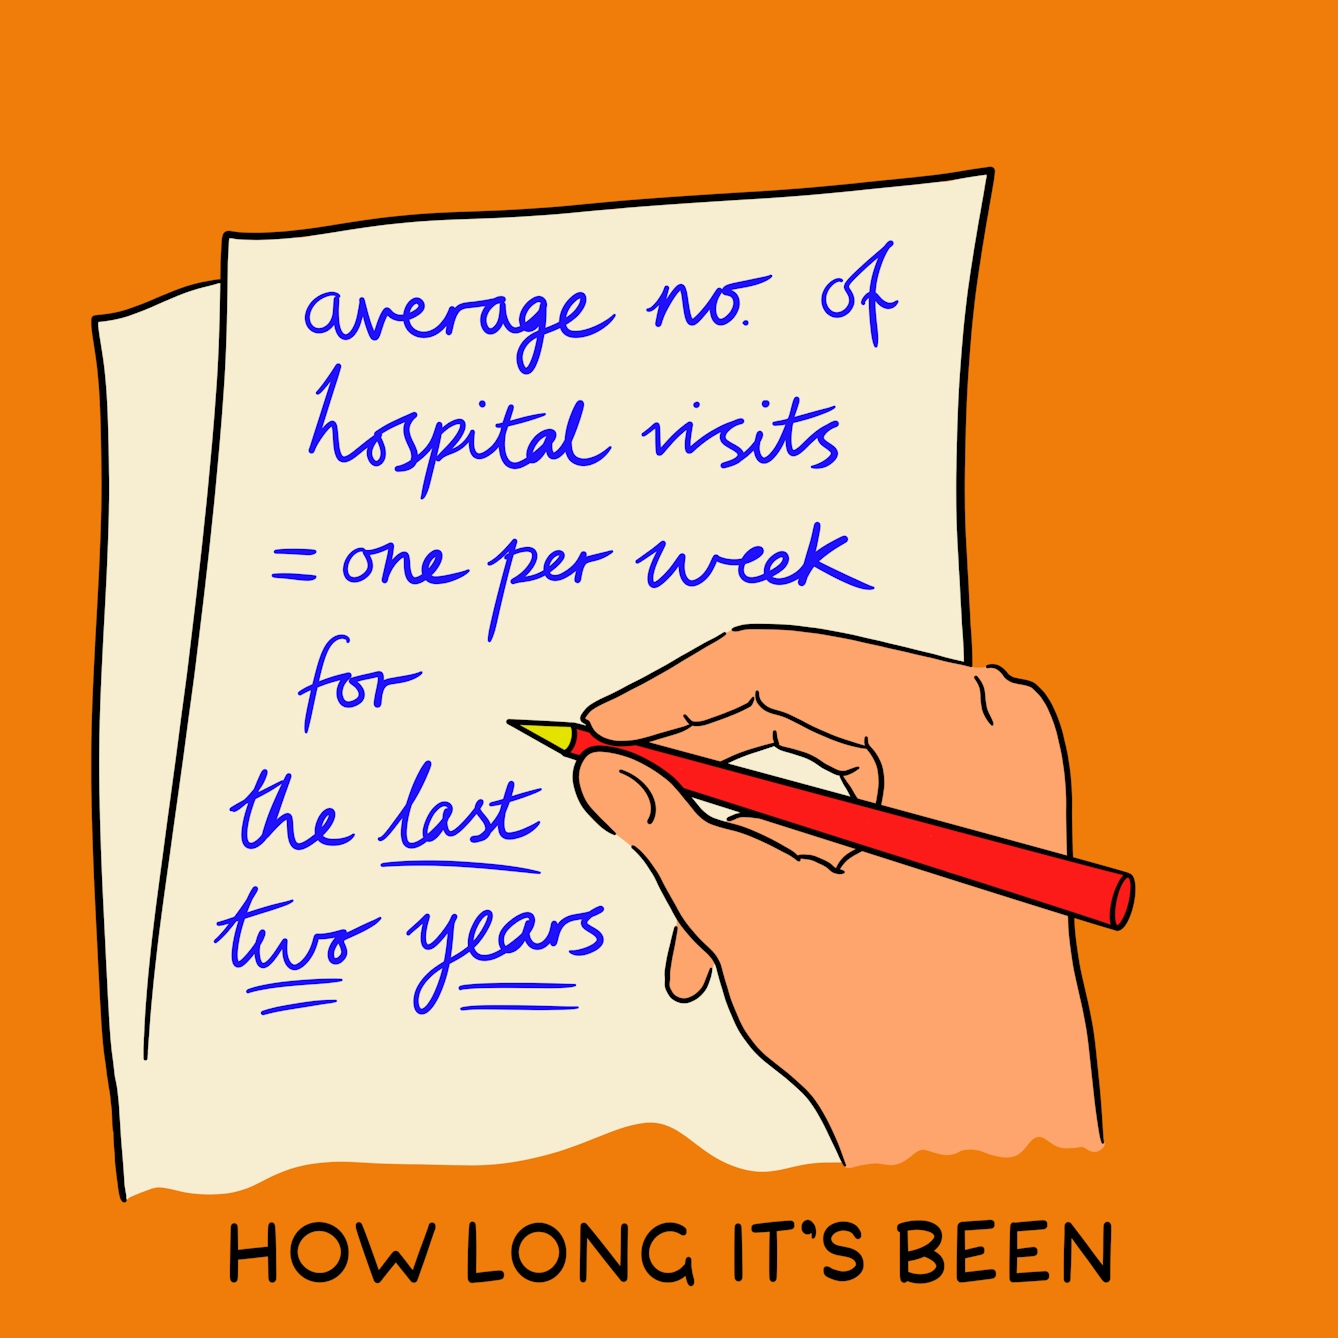 Panel 2 of a four-panel comic drawn digitally: a hand holding a pencil hovers over a sheaf of paper, the top sheet of which has cursive text reading "average no. of hospital visits = one per week for the last two years". Two years is double underlined. 
The caption text reads "How long it's been"